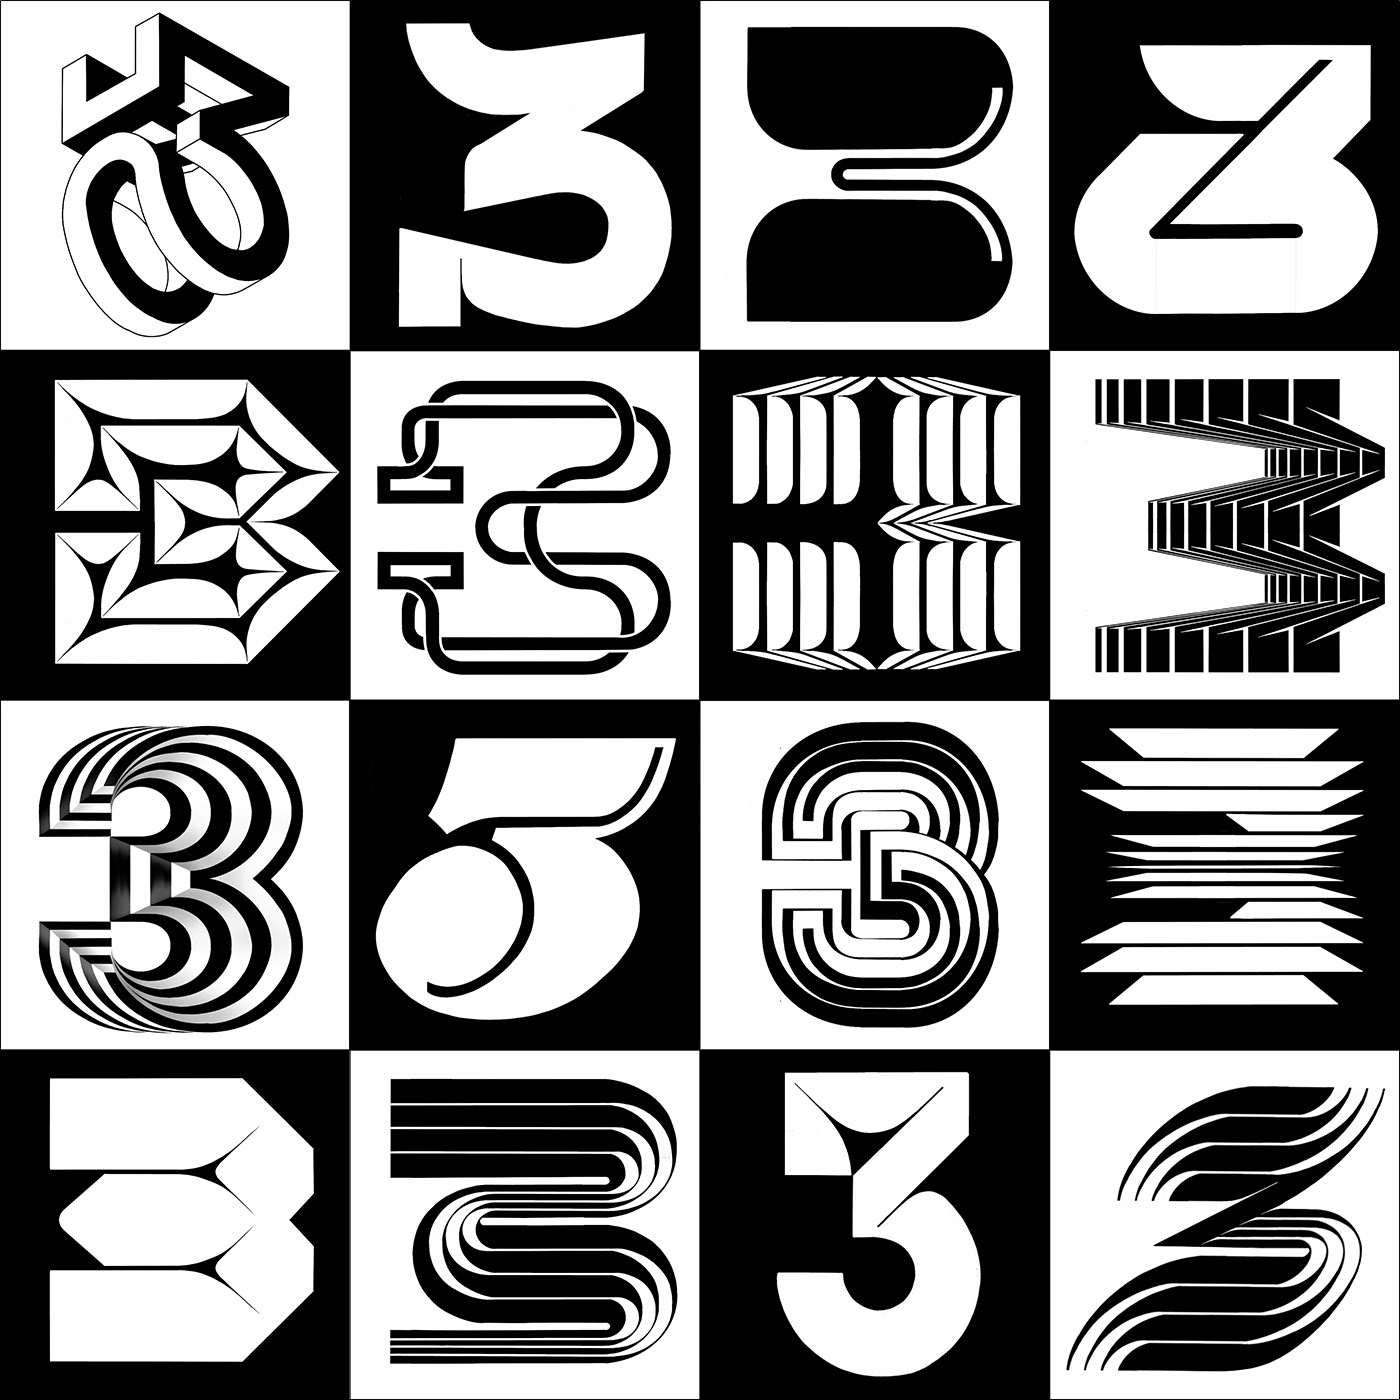 type Typeface type design 36daysoftype lettering vector alphabet letters font numbers